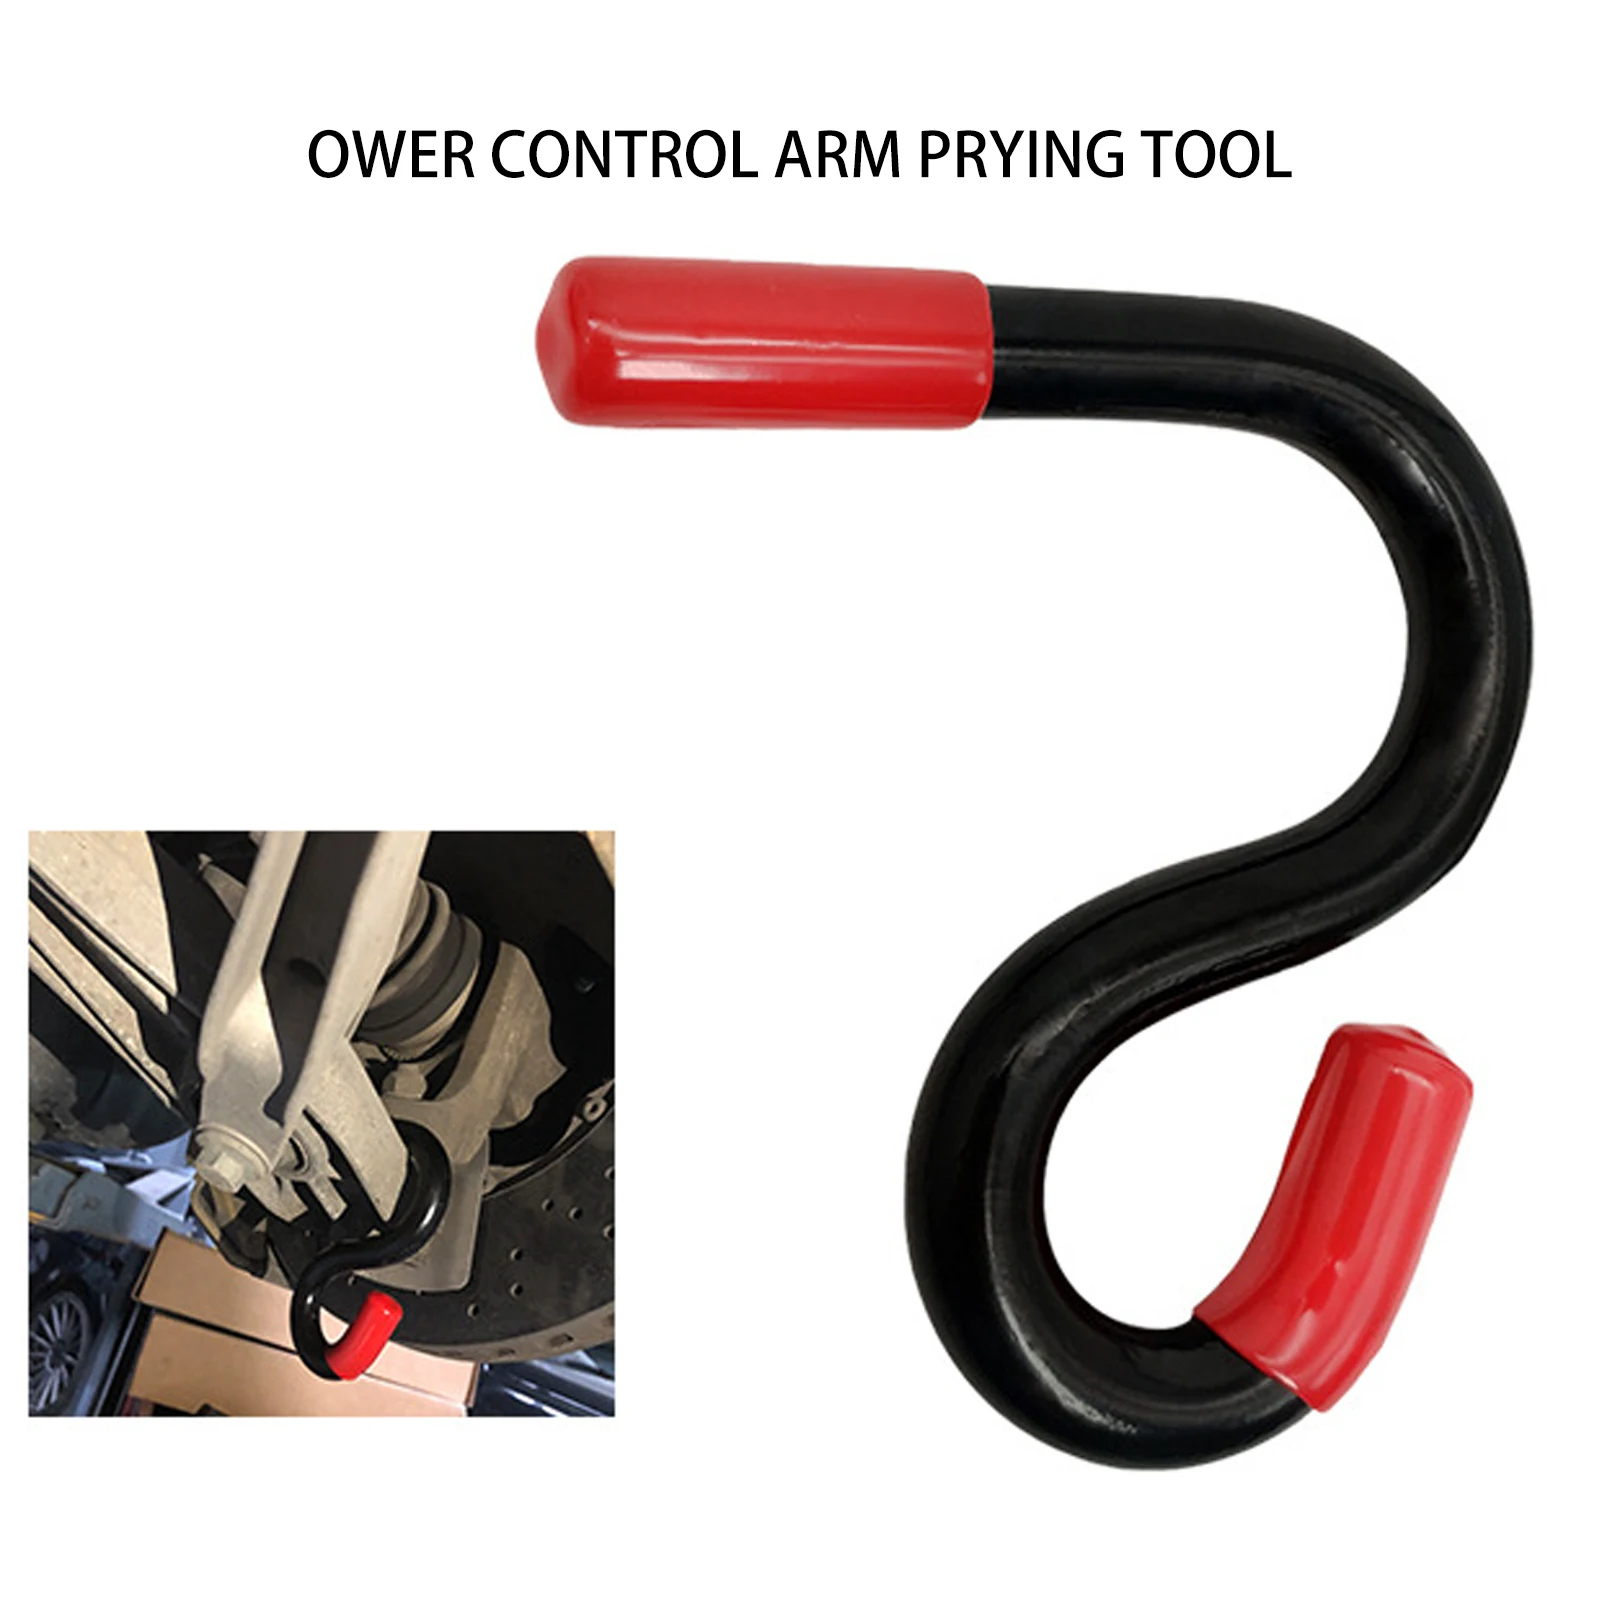 Lower Control Arm Prying Tool Bushing Removal Ball Joint Press Separators Auto Dissembly Installer Repair Tools